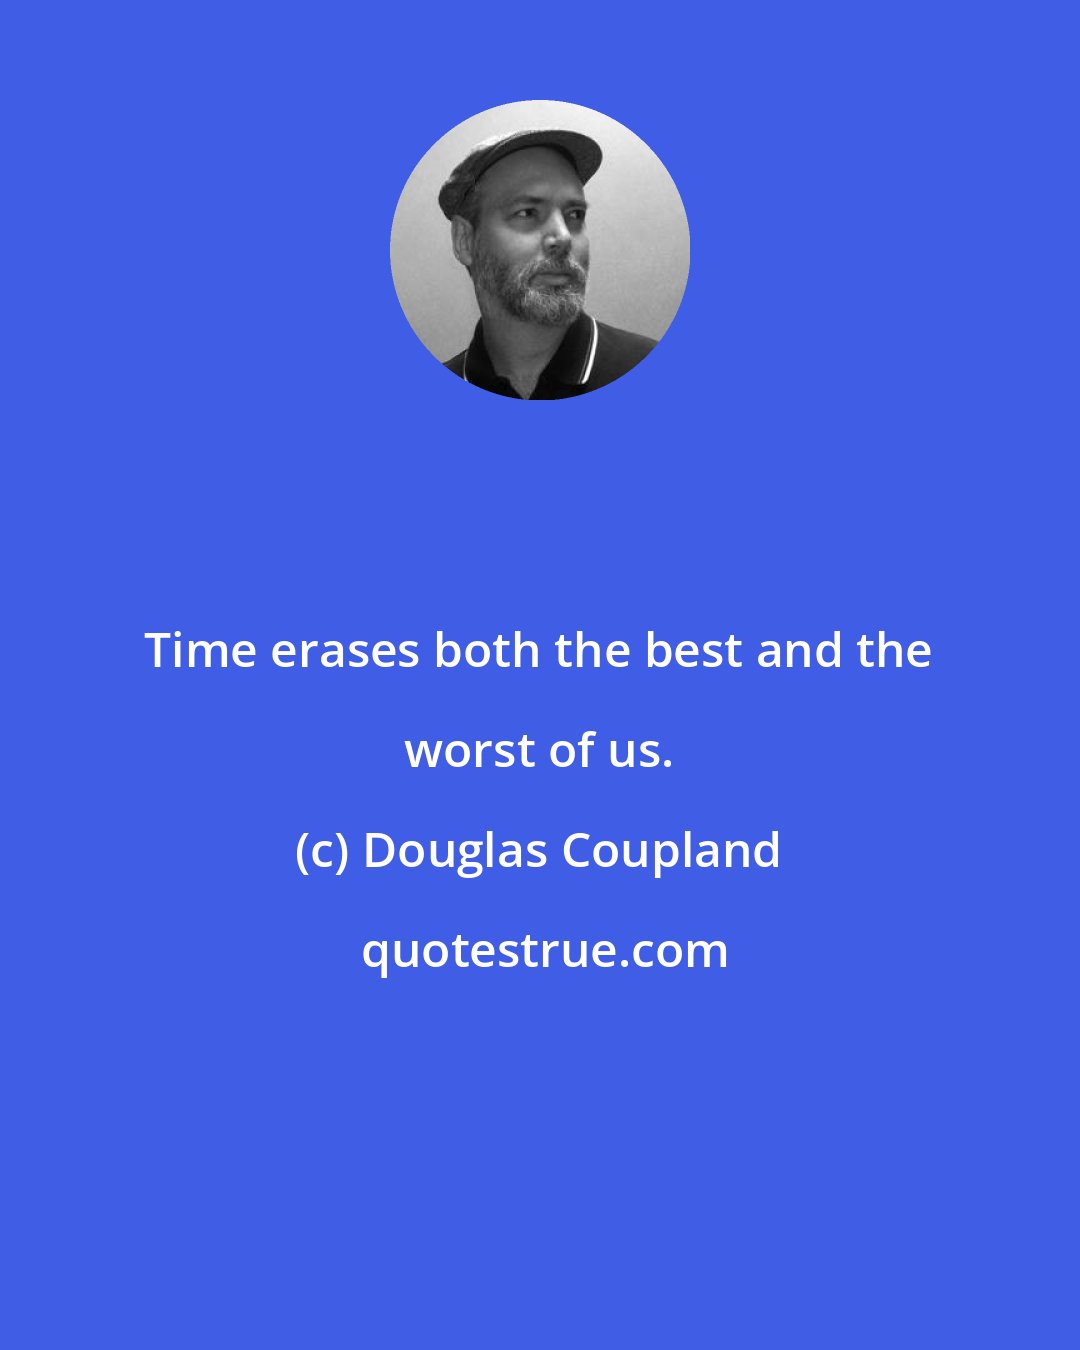 Douglas Coupland: Time erases both the best and the worst of us.